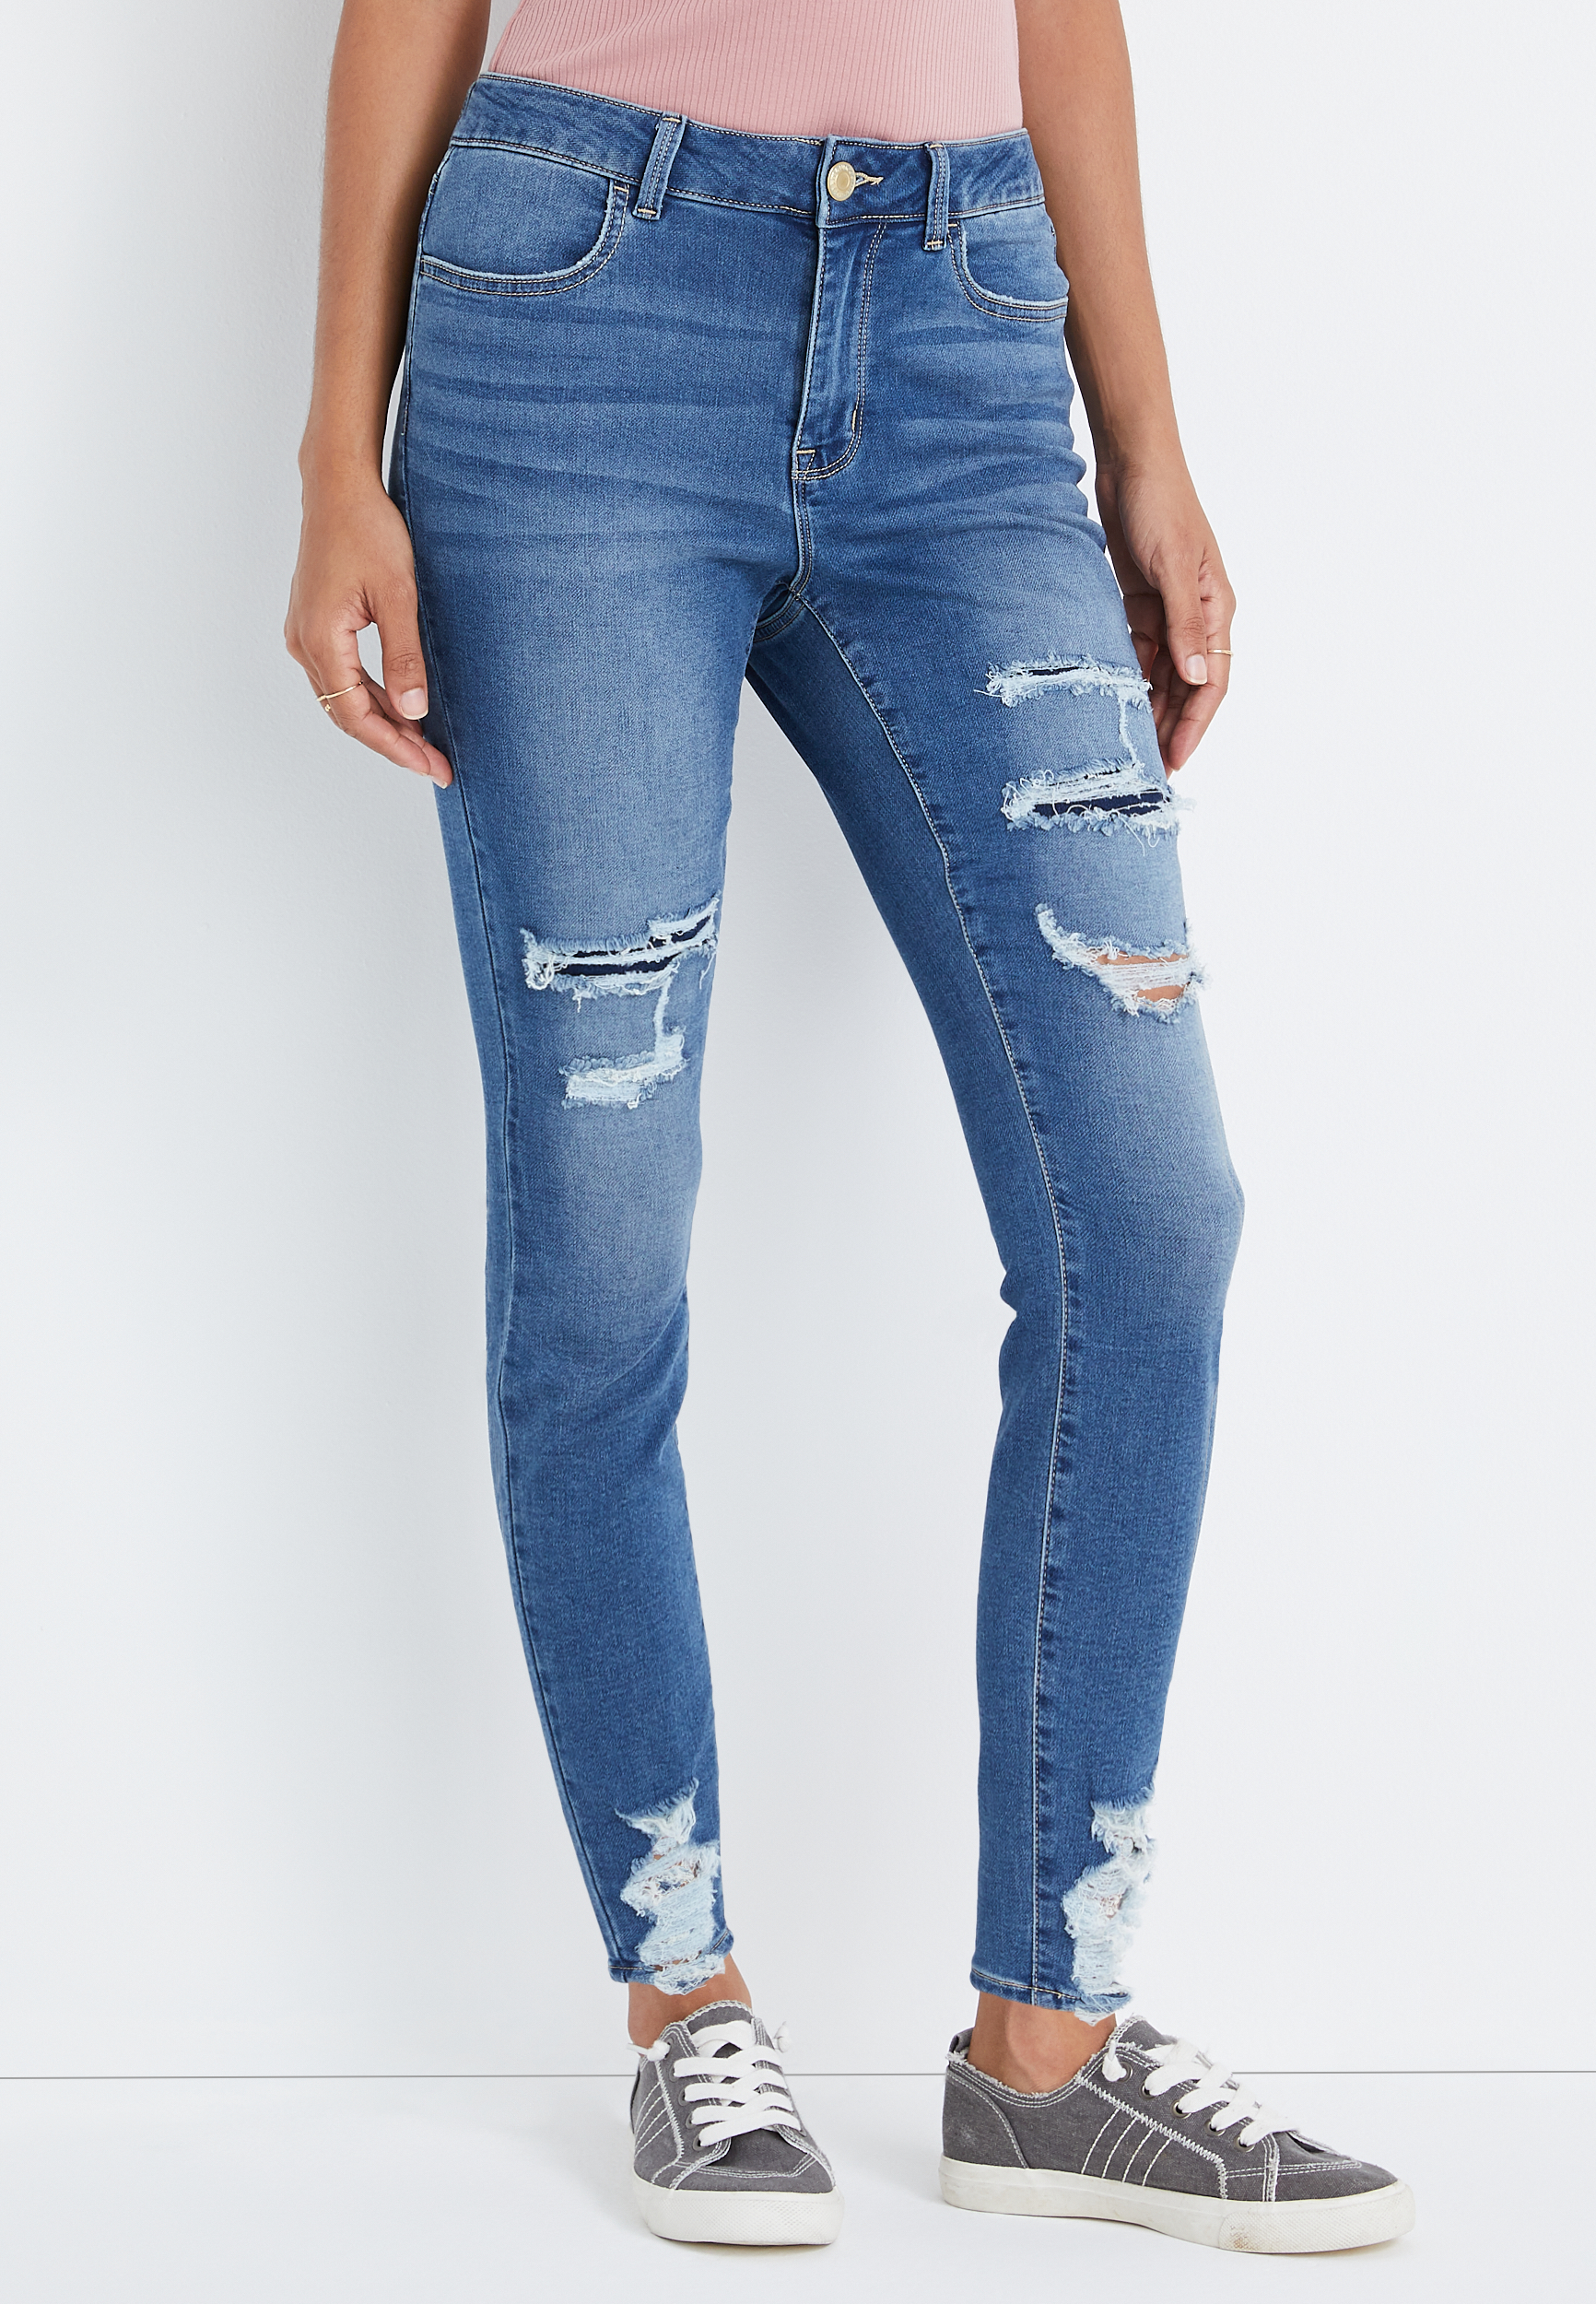 m jeans by maurices™ Super Soft High Rise Ripped Jegging